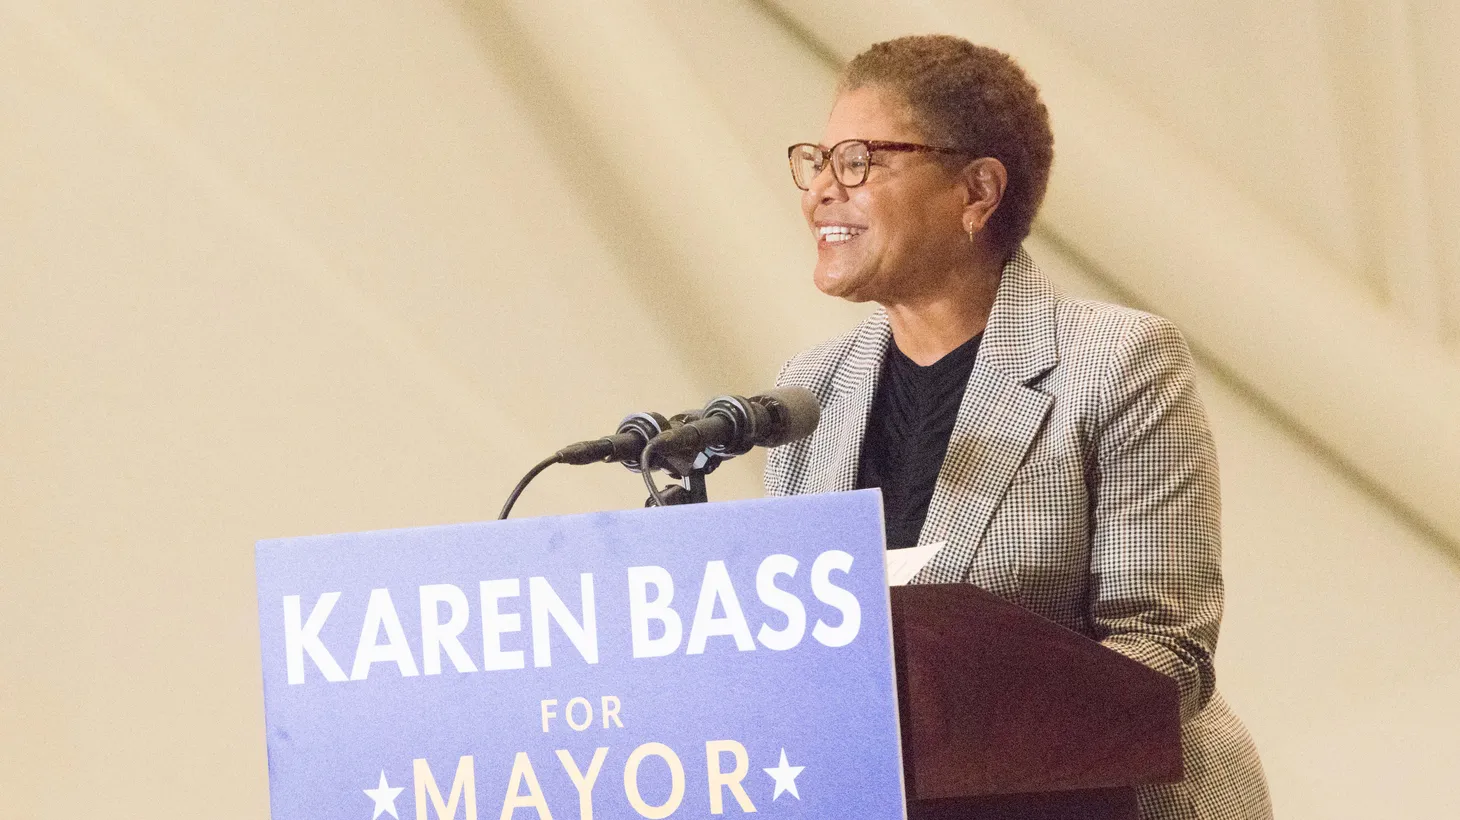 Karen Bass (D-CA) speaks onstage at a Los Angeles mayoral campaign rally at the Playa Vista Central Park Bandshell on October 27, 2022 in Los Angeles, California, United States.